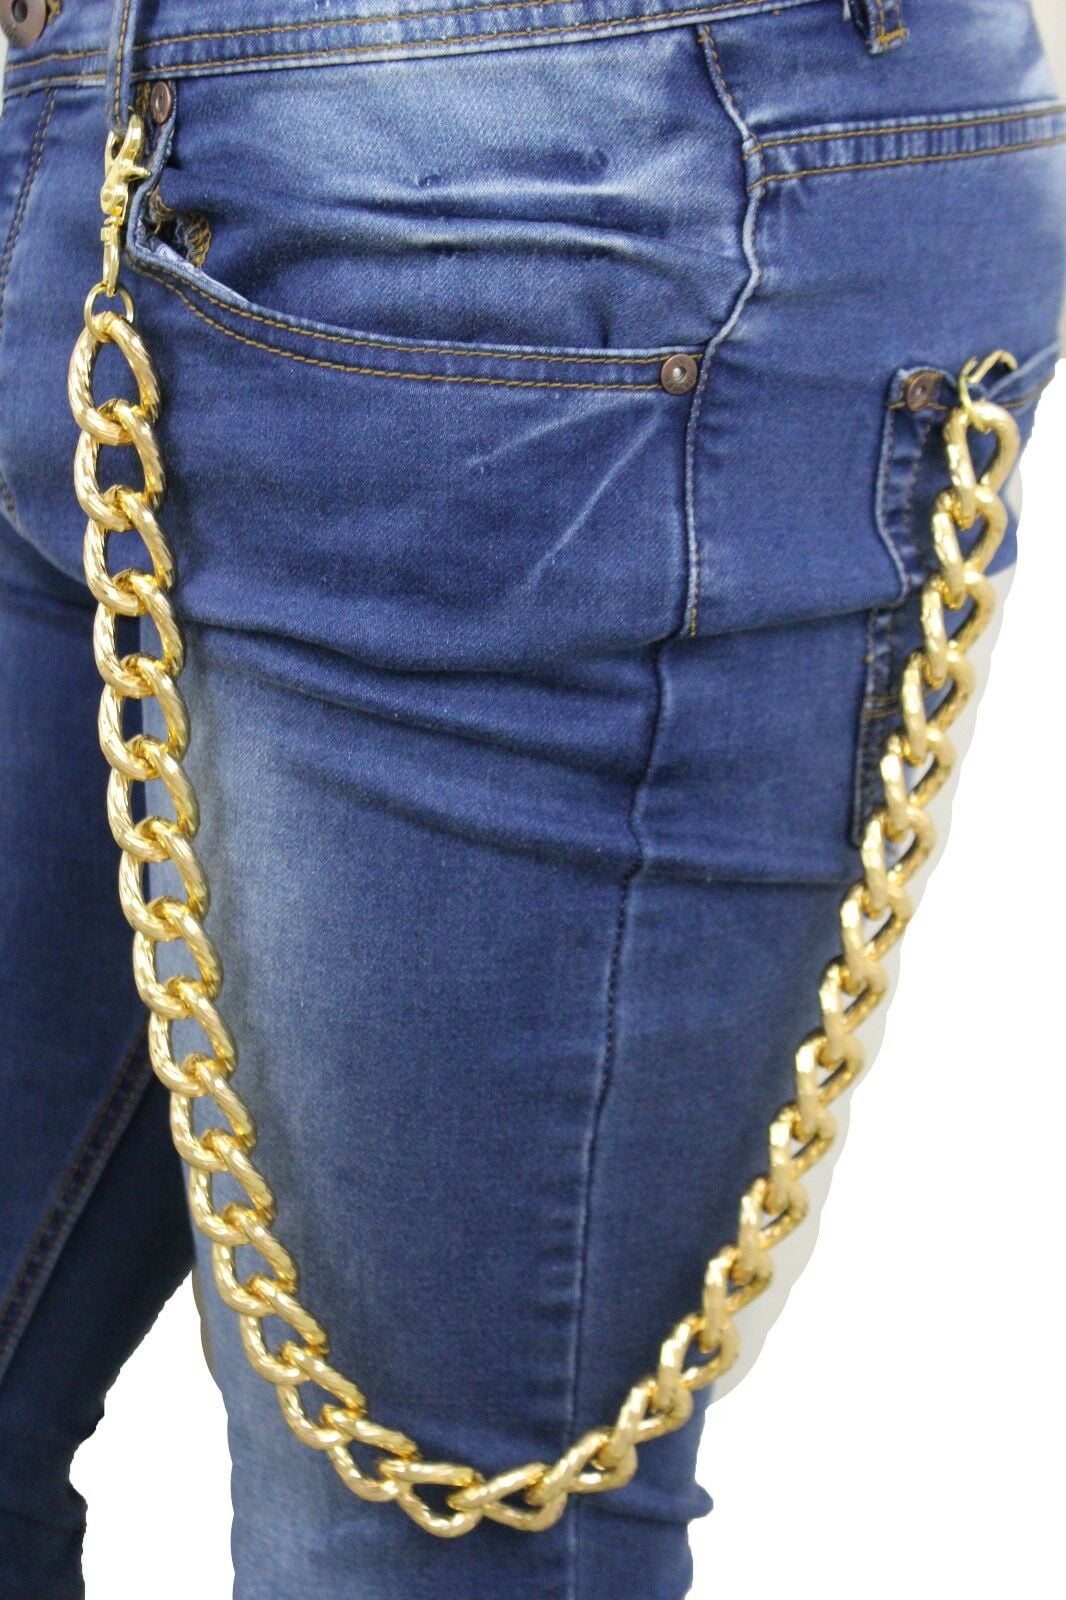 Alwaystyle4You Men's Strong Chunky Jean Biker Wallet Chain